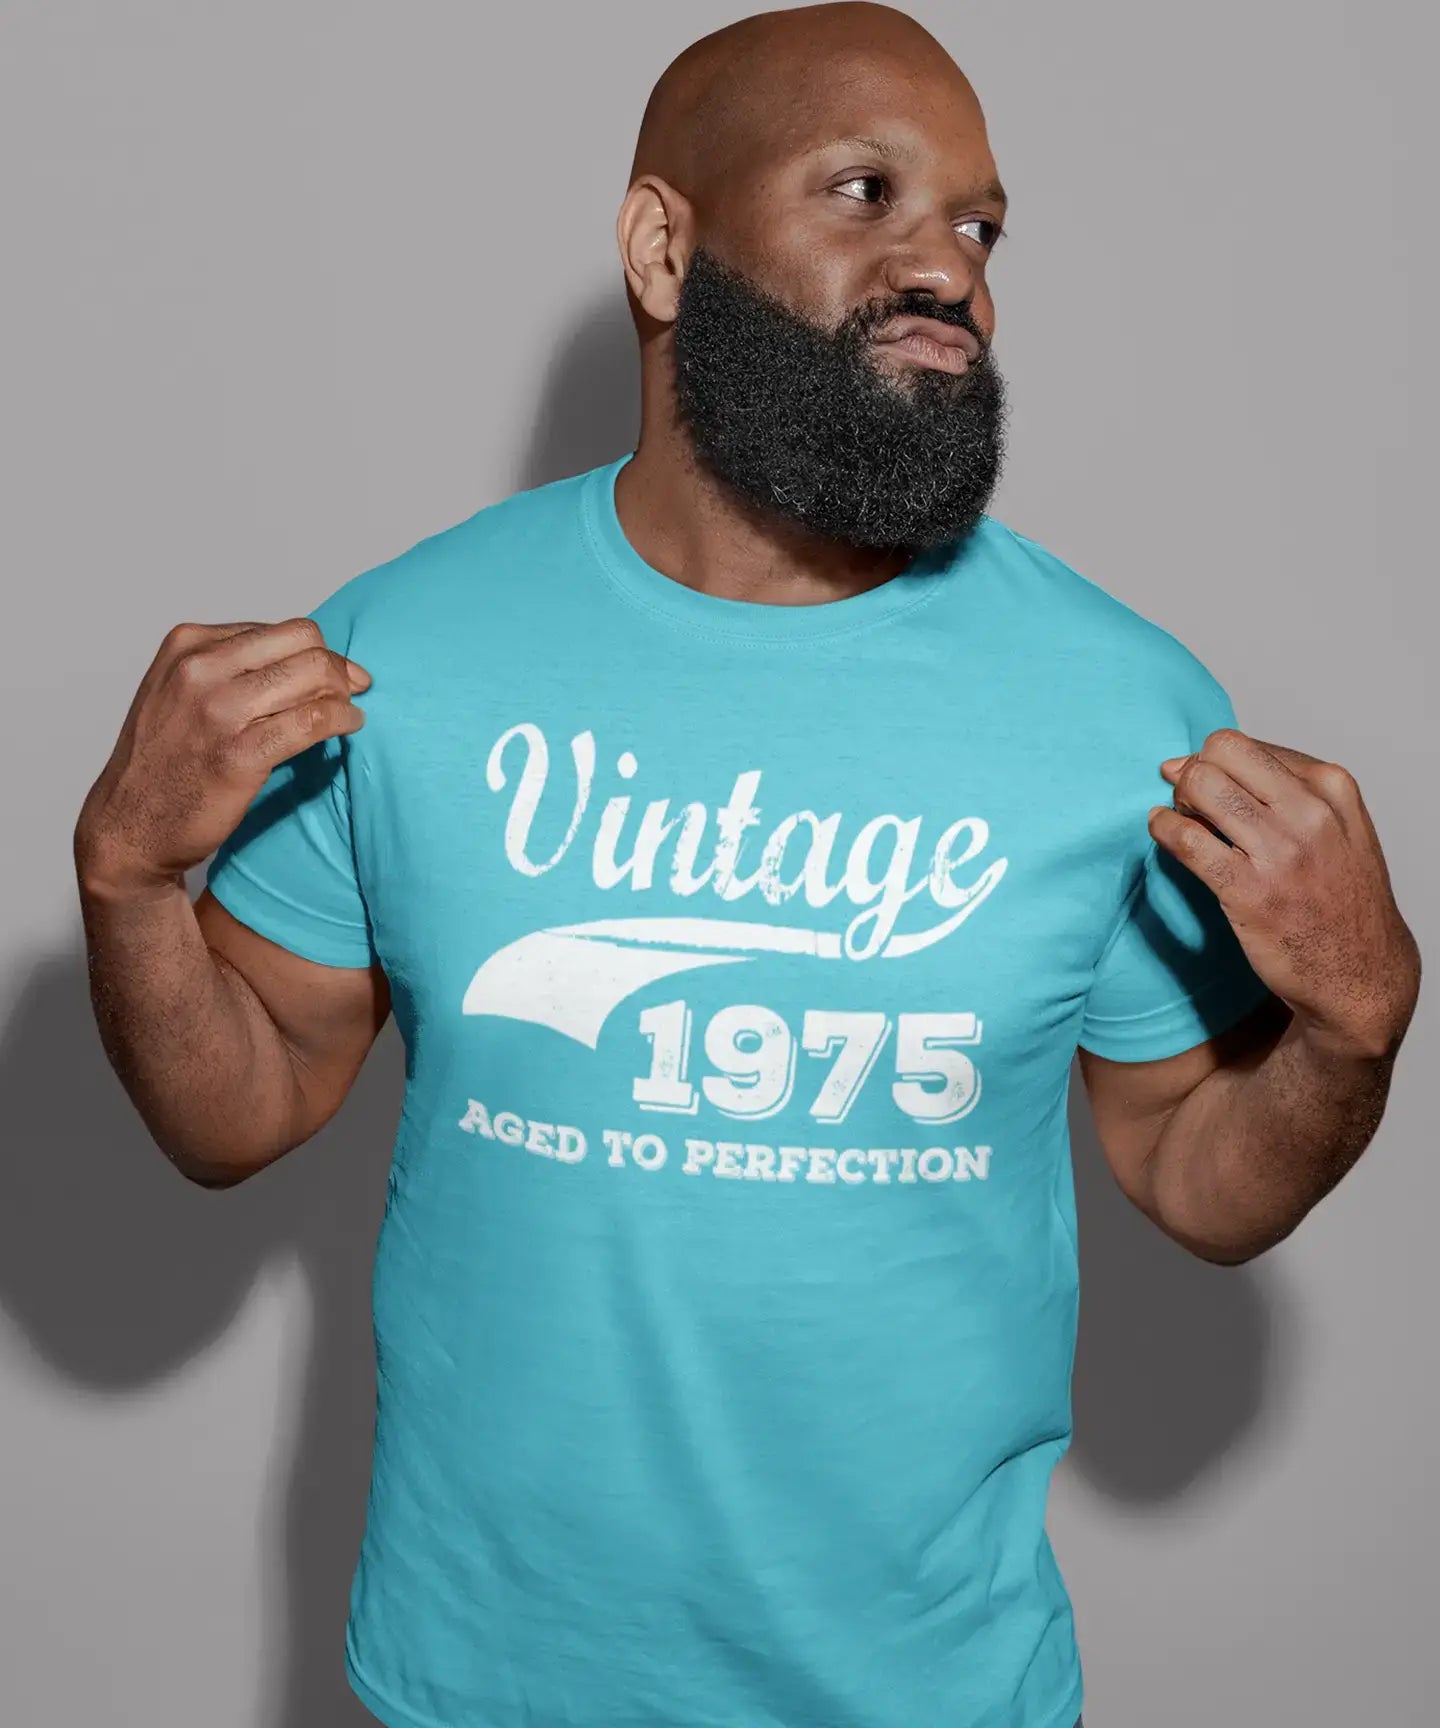 1975 Vintage Aged to Perfection, Blue, Men's Short Sleeve Round Neck T-shirt 00291